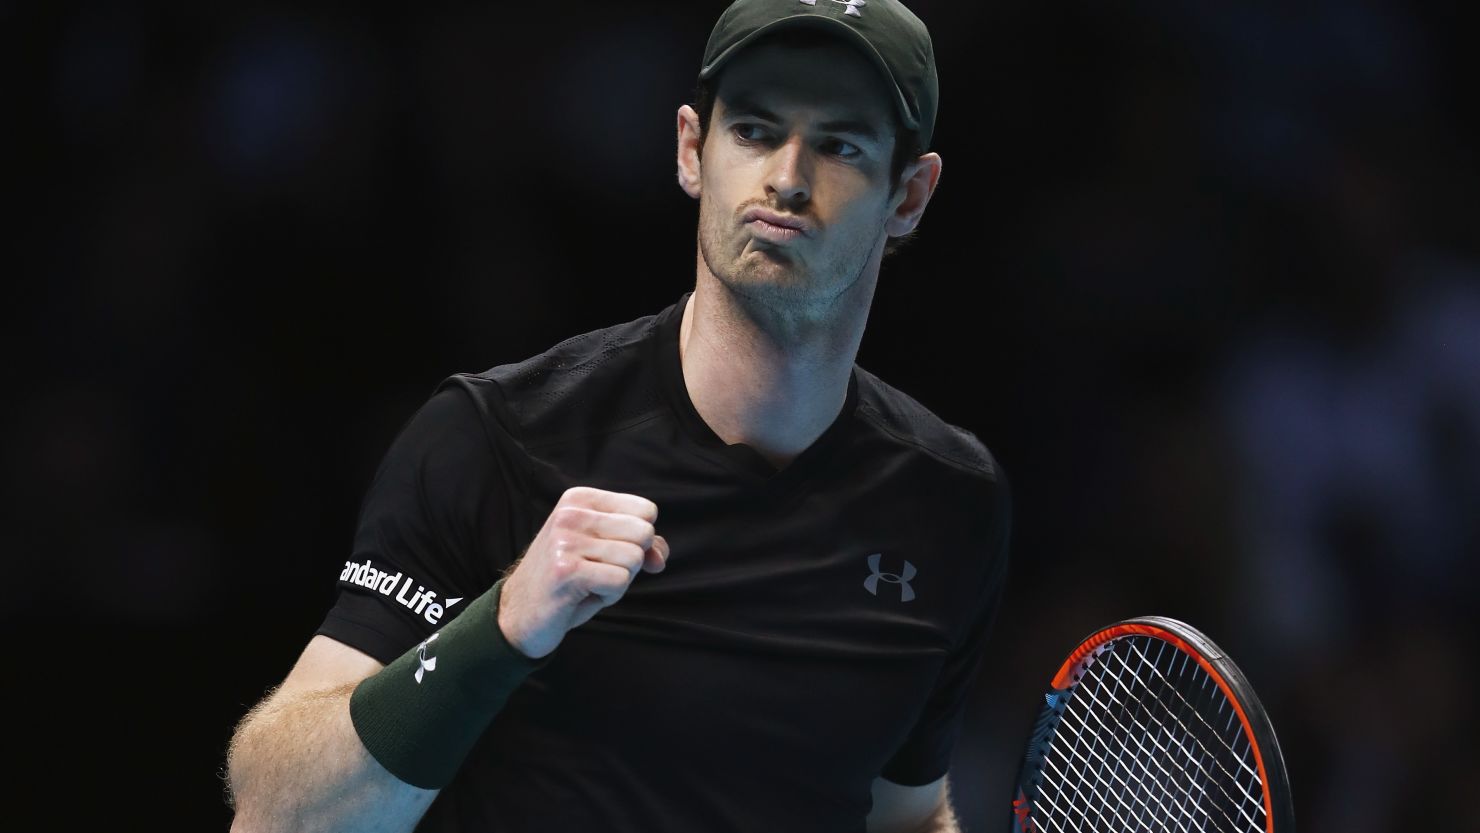 Andy Murray celebrates during Friday's win over Stan Wawrinka at London's O2 Arena.